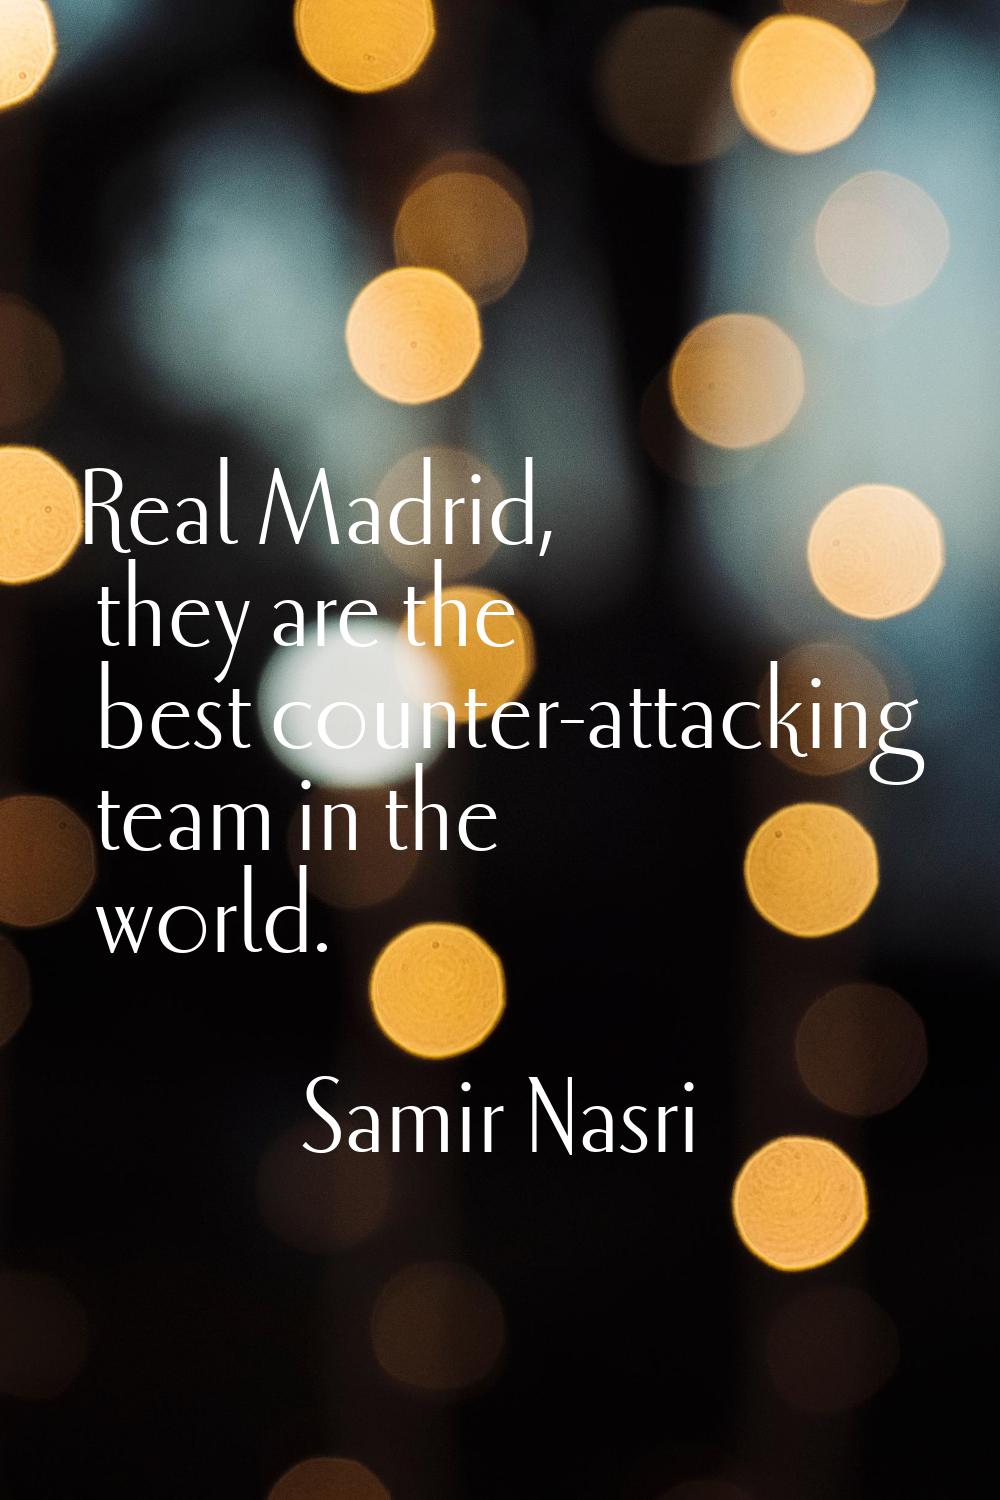 Real Madrid, they are the best counter-attacking team in the world.